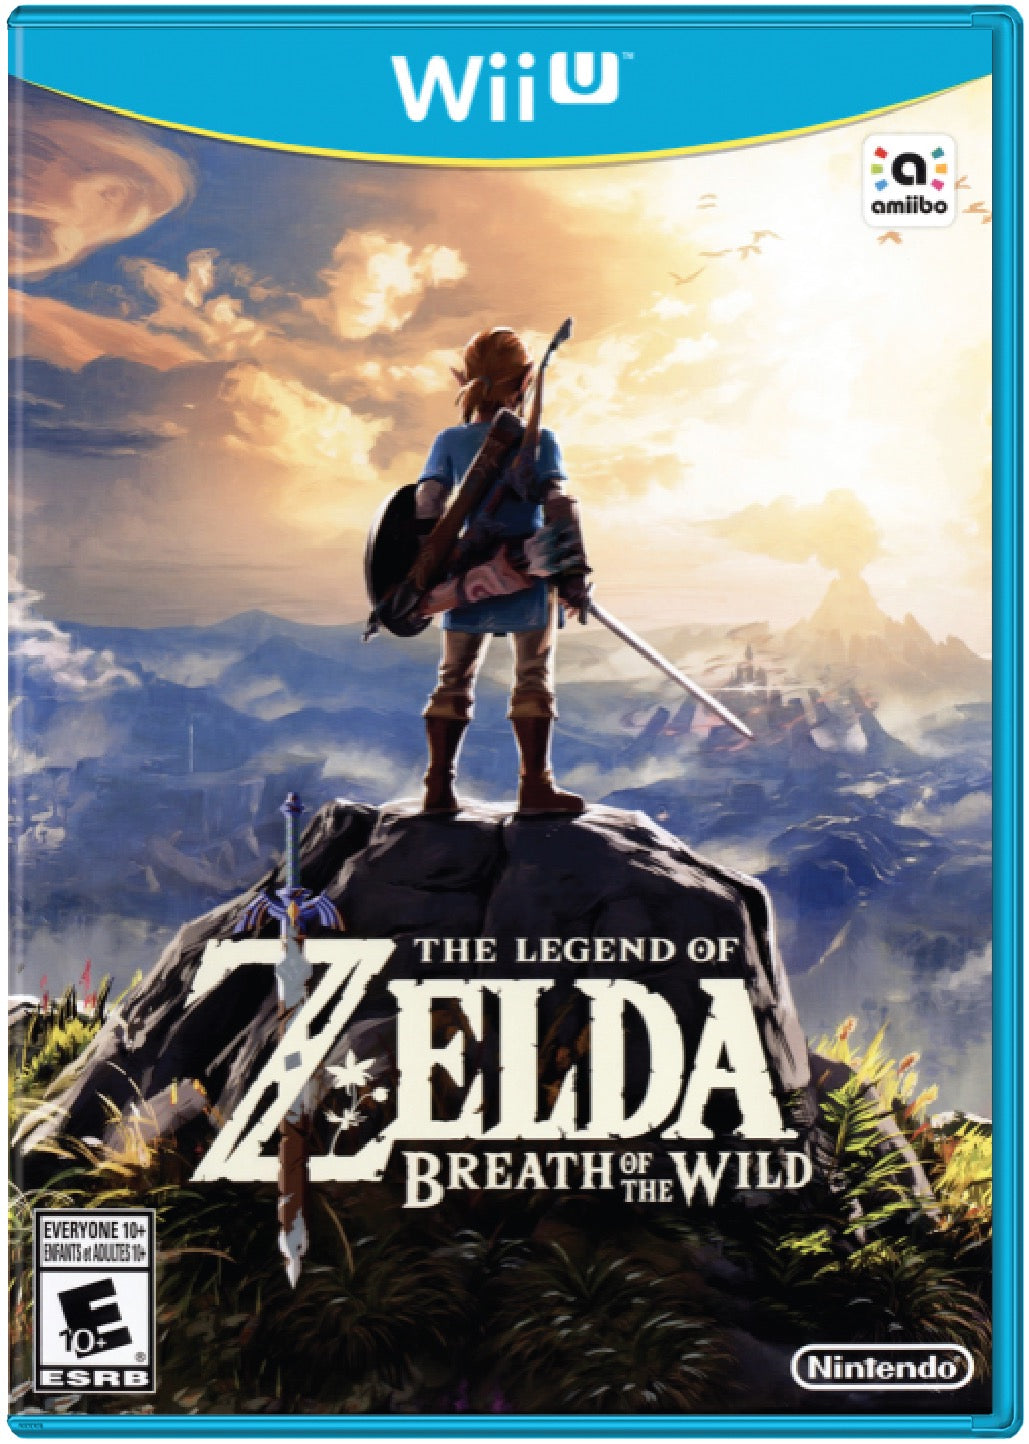 The Legend of Zelda Breath of the Wild Cover Art and Product Photo